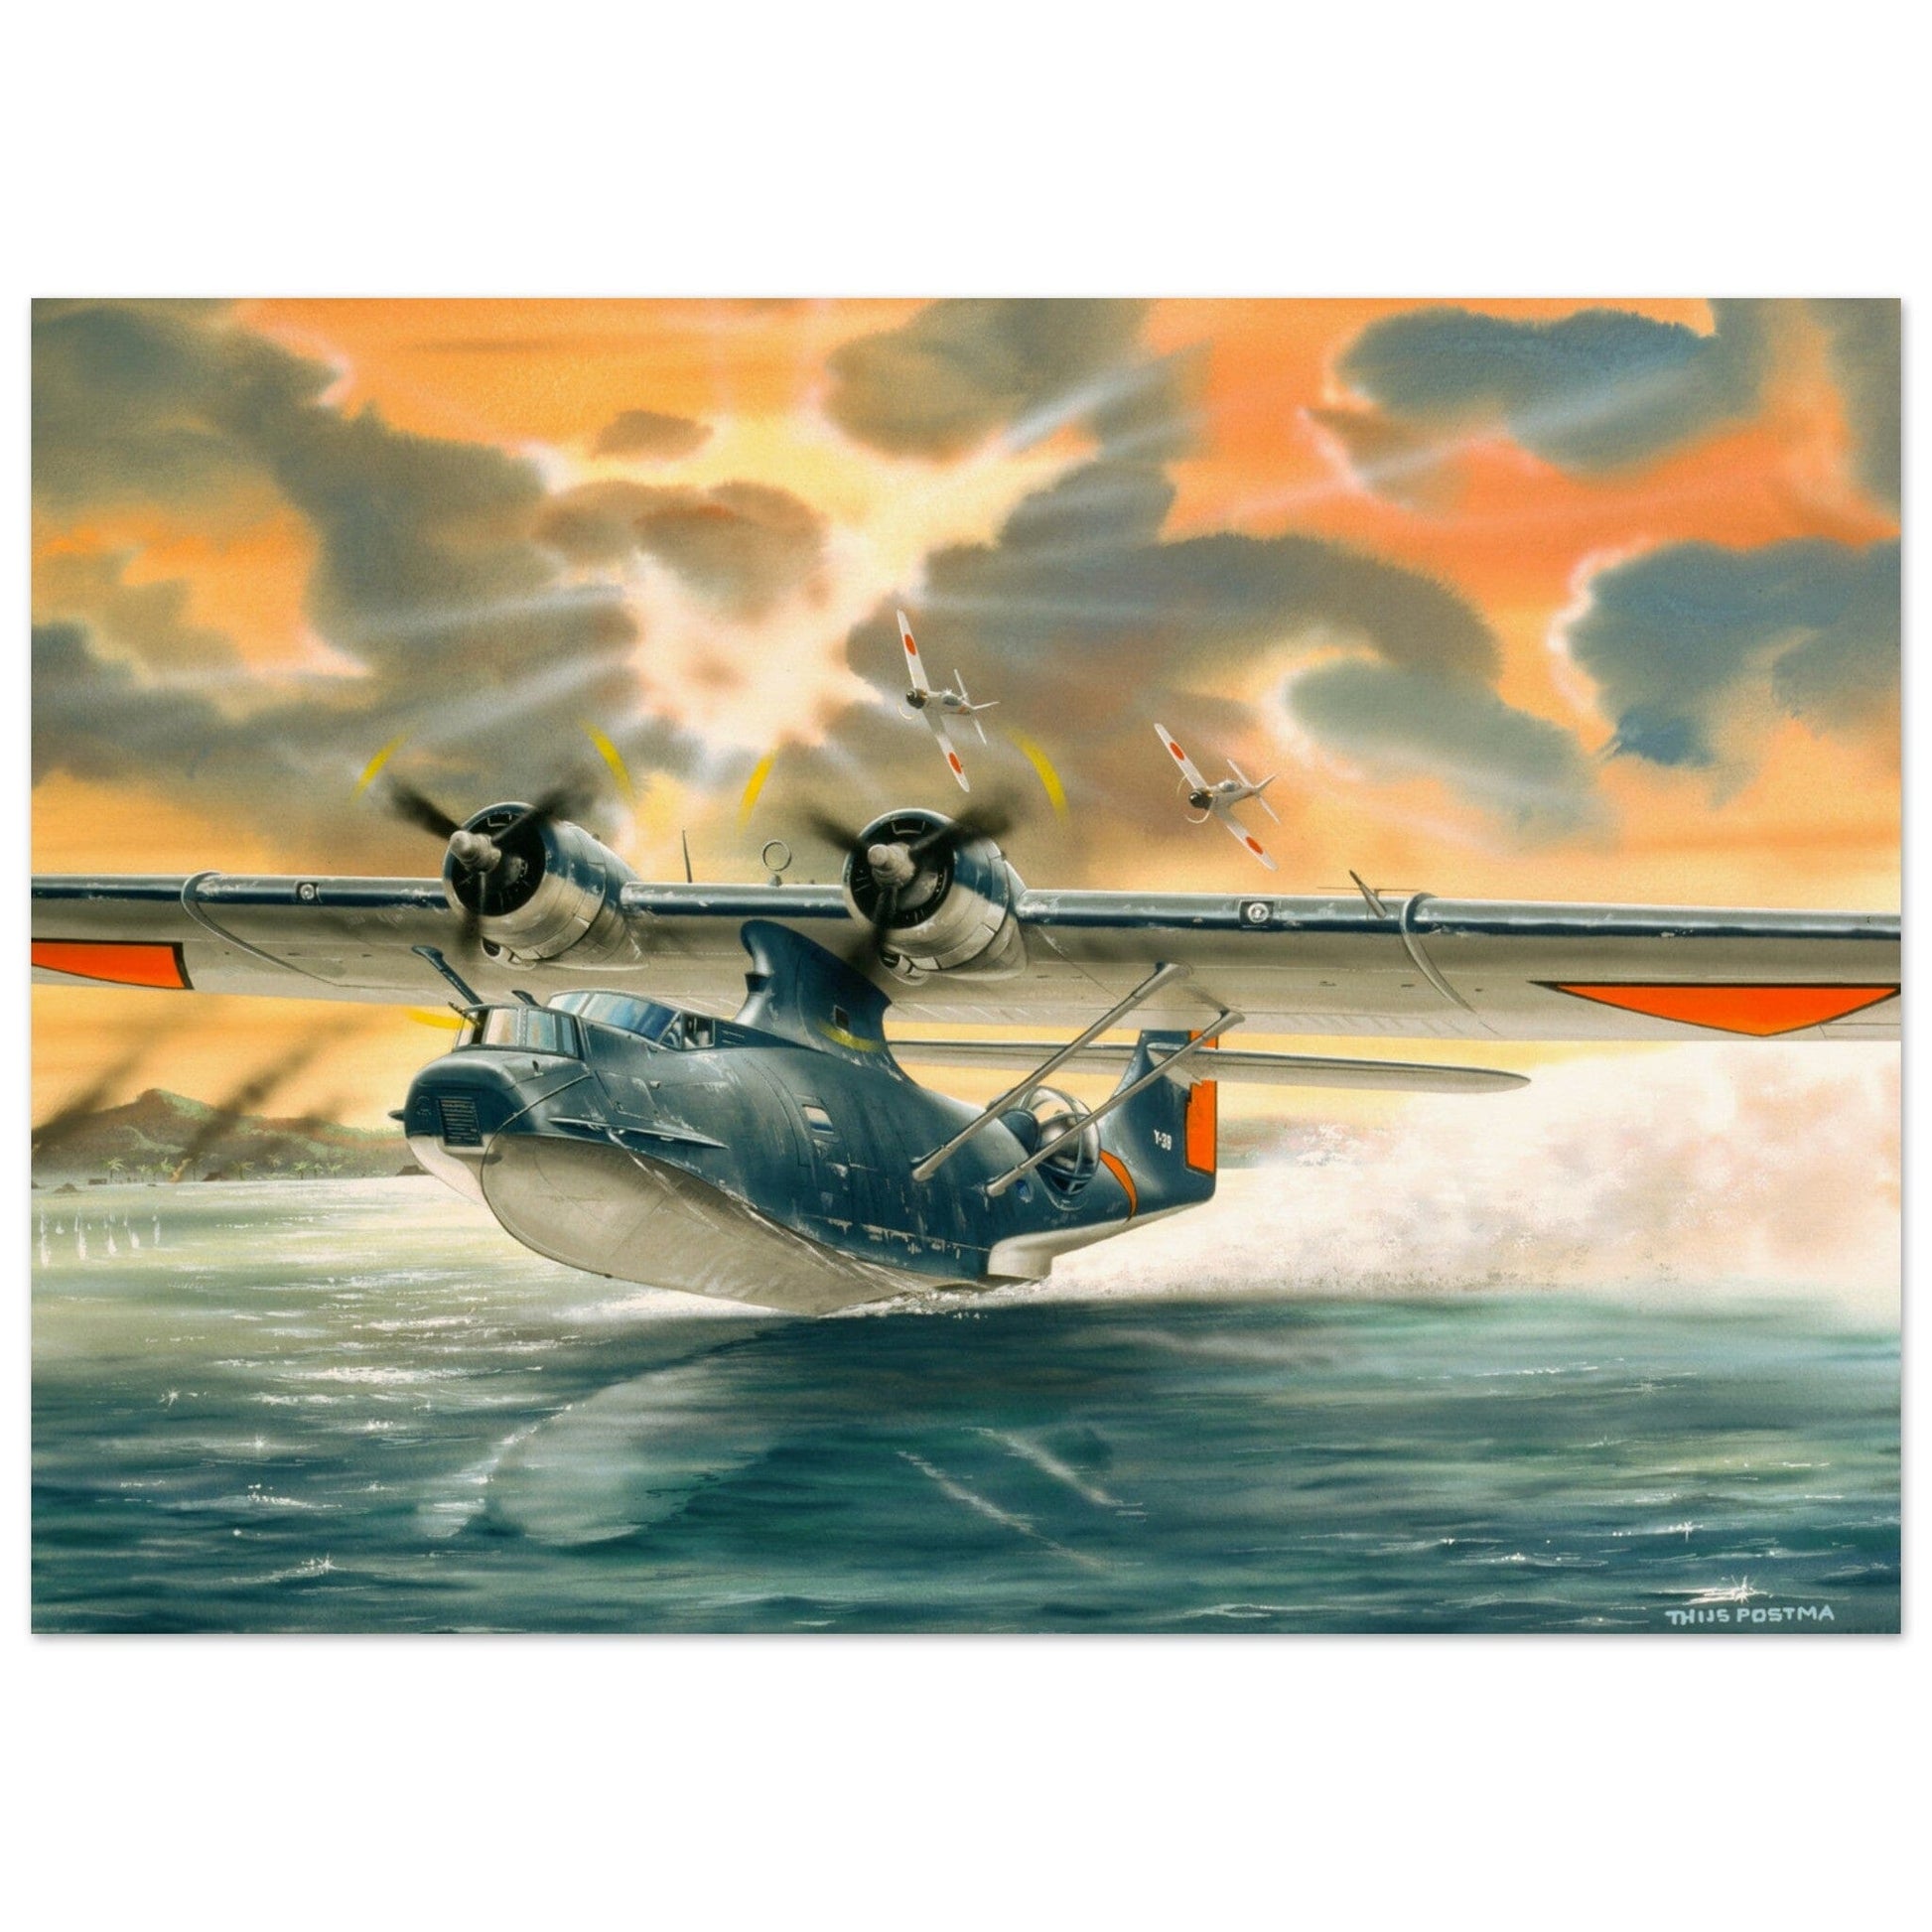 Thijs Postma - Poster - Convair PBY-5 Catalina Attacked By Zeros Poster Only TP Aviation Art 50x70 cm / 20x28″ 